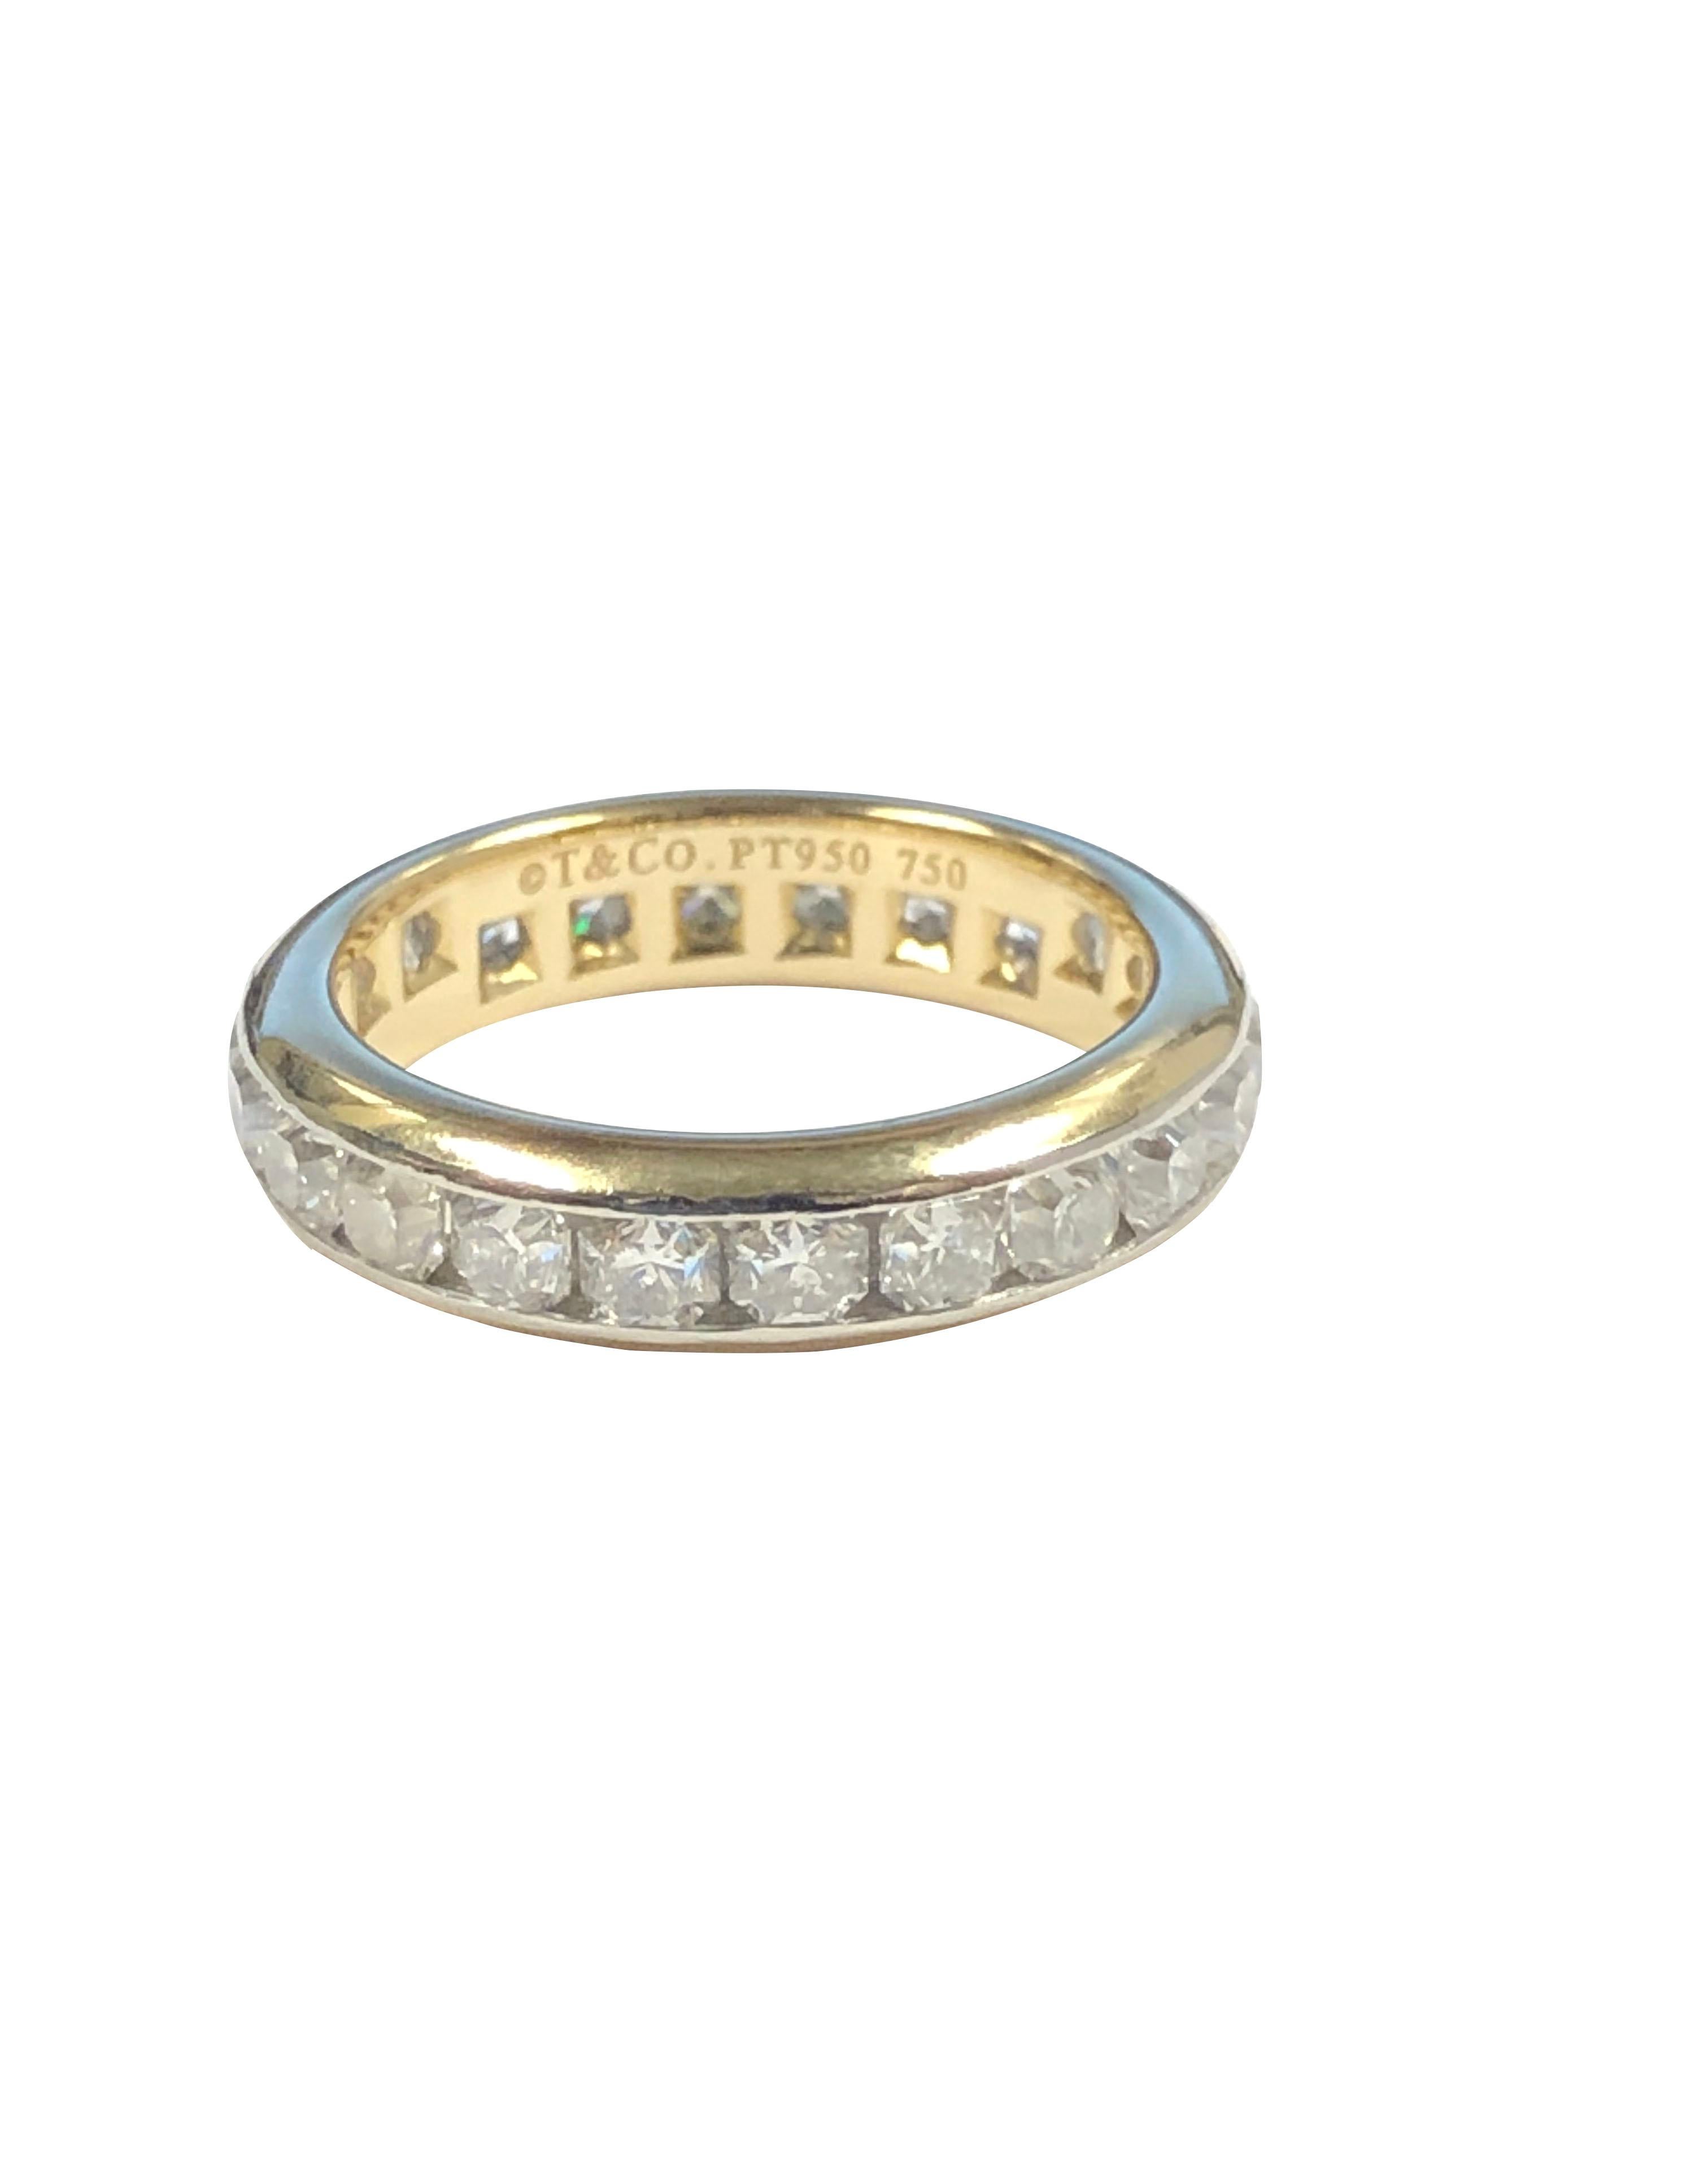 Circa 2010 Tiffany & Company Lucida Diamond collection Eternity Band Ring, 4.5 MM wide 18k and Platinum with 22 Channel set Lucida Cut Diamonds totaling 2.50 carats and grading as F - G color and VS Clarity. Finger size 7, comes in the original